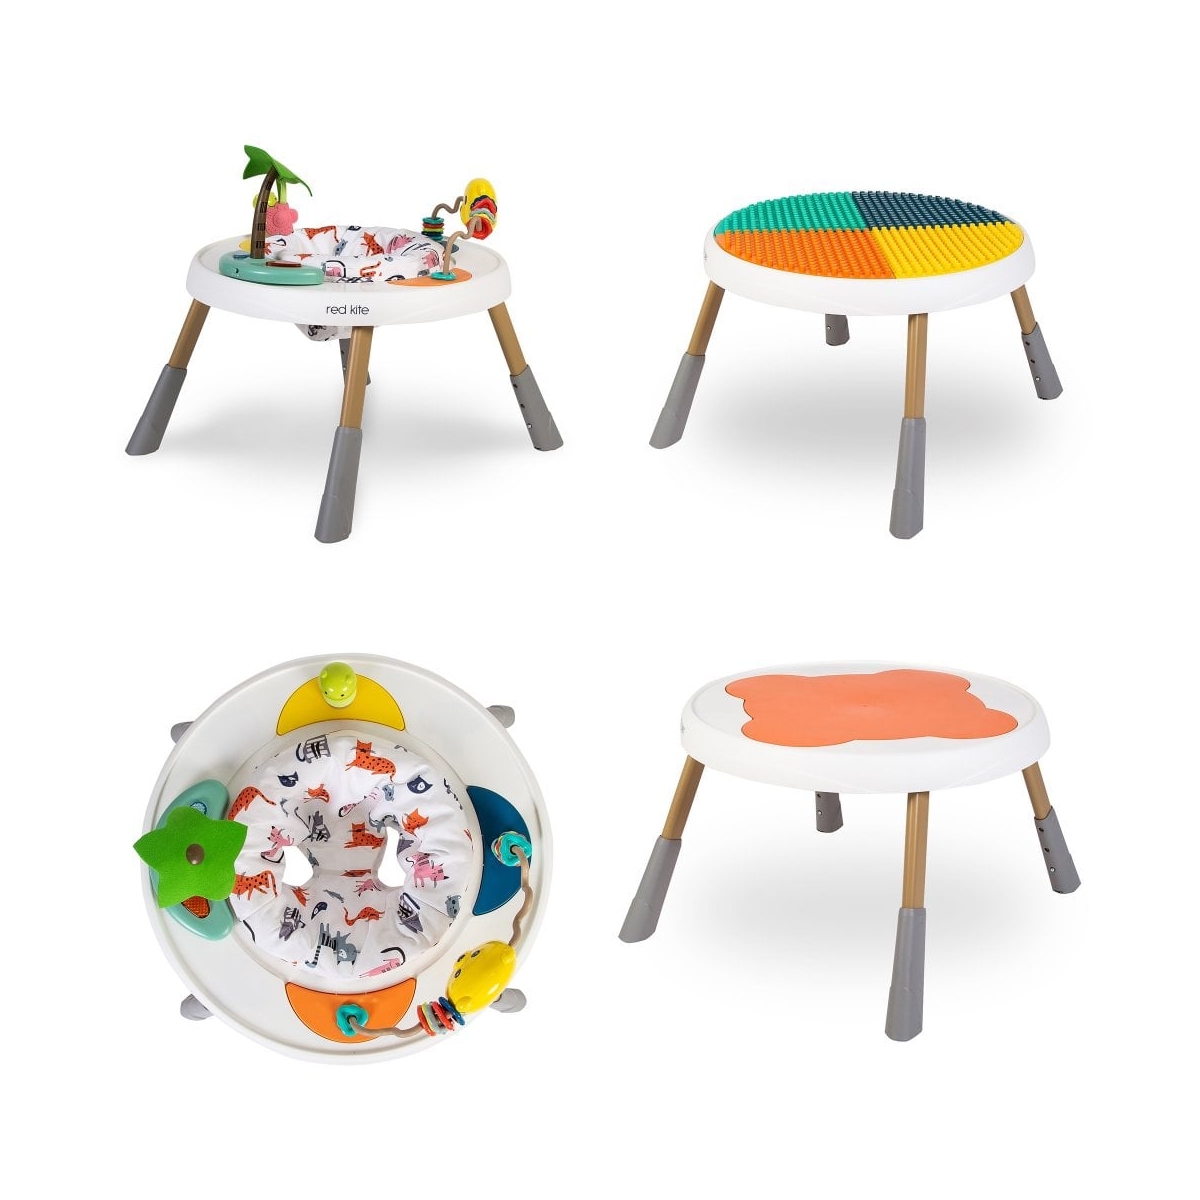 Red Kite Baby Go Round 3in1 Play Table